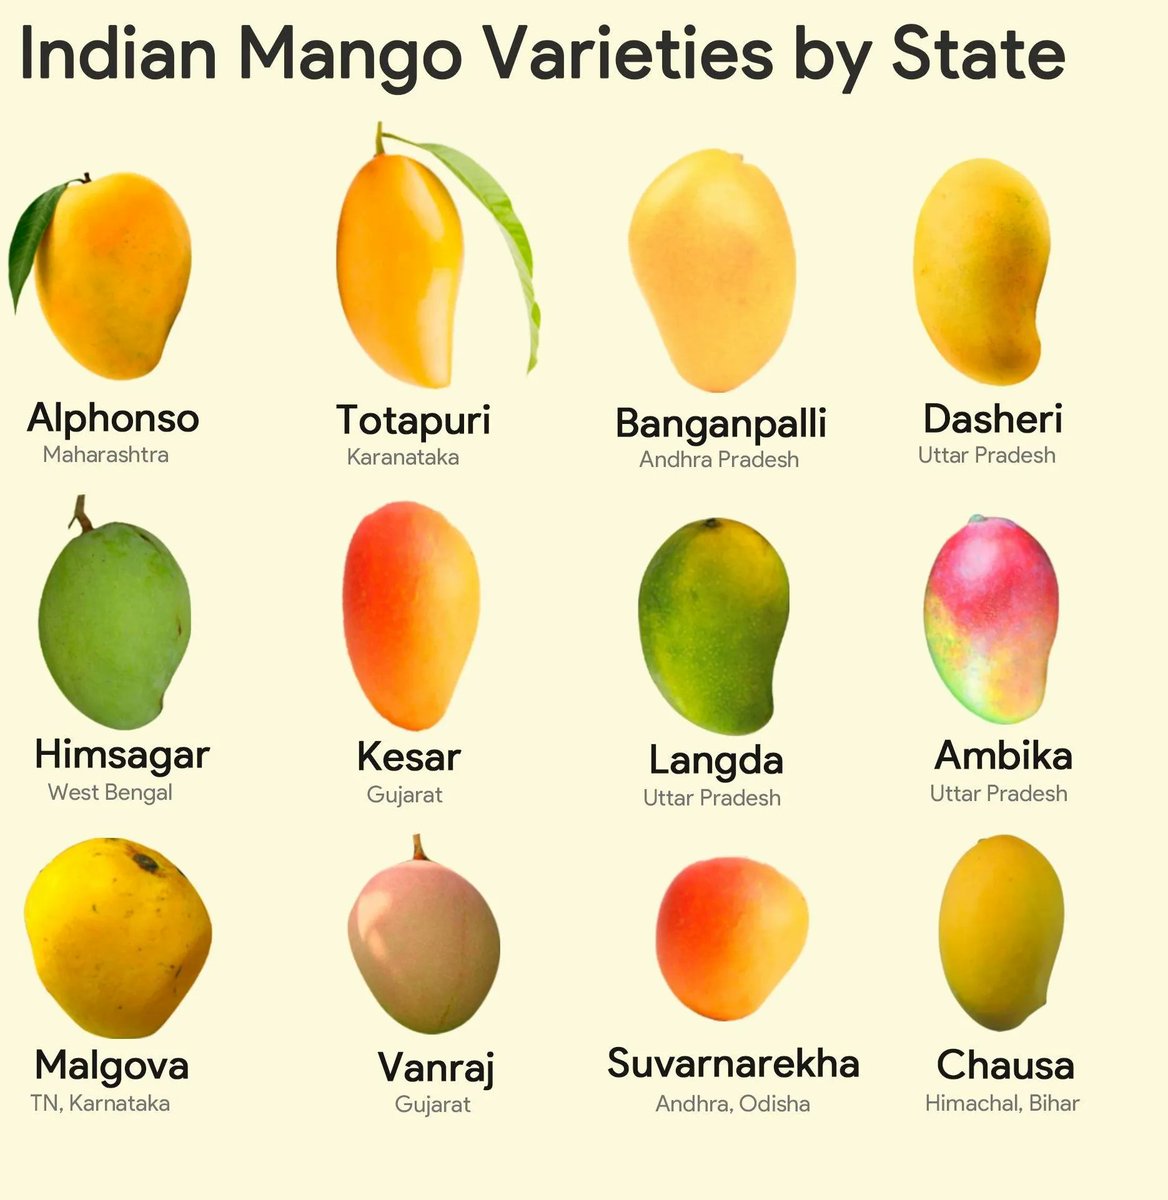 🥭🌞 'Time to Mango-fy Your Day! 
Comment mango variety makes your taste buds sing the sweetest tune? Share your favourite and let the mango debates begin! 🎵😋 #MangoMadness
#UPSC #UPSC2023 #UPSCAspirant #SSC #RRB #RRBNTPC #CHSL #CGL